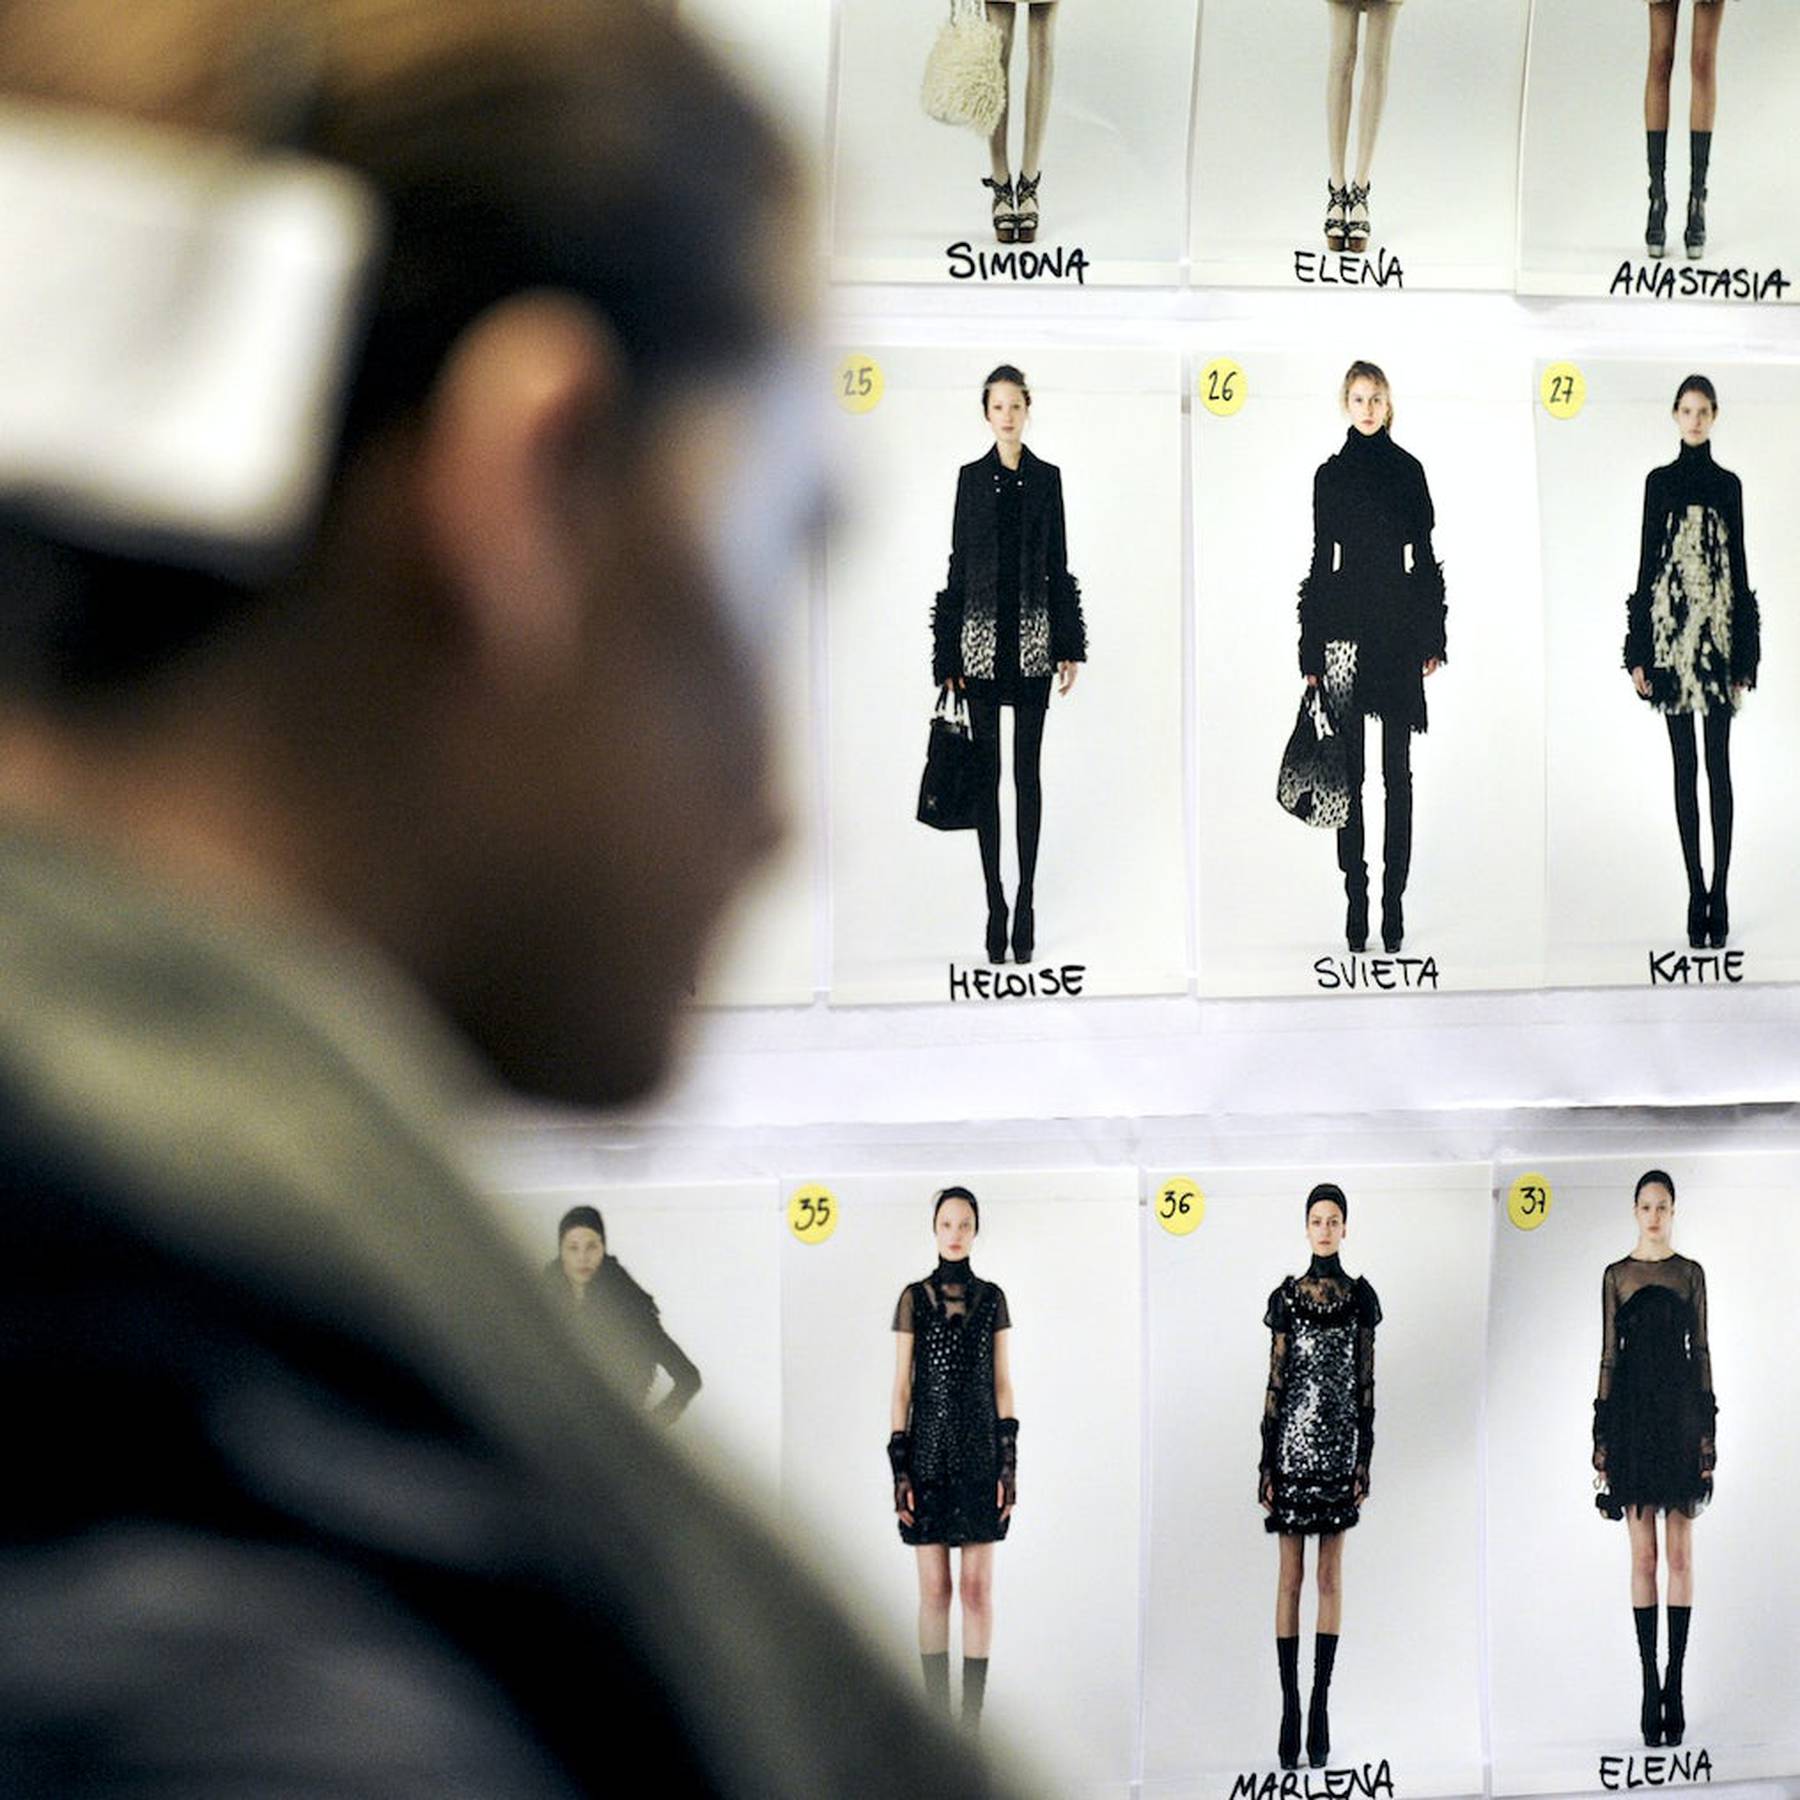 LVMH draws up a charter on working relations with fashion models and their  well-being - LVMH